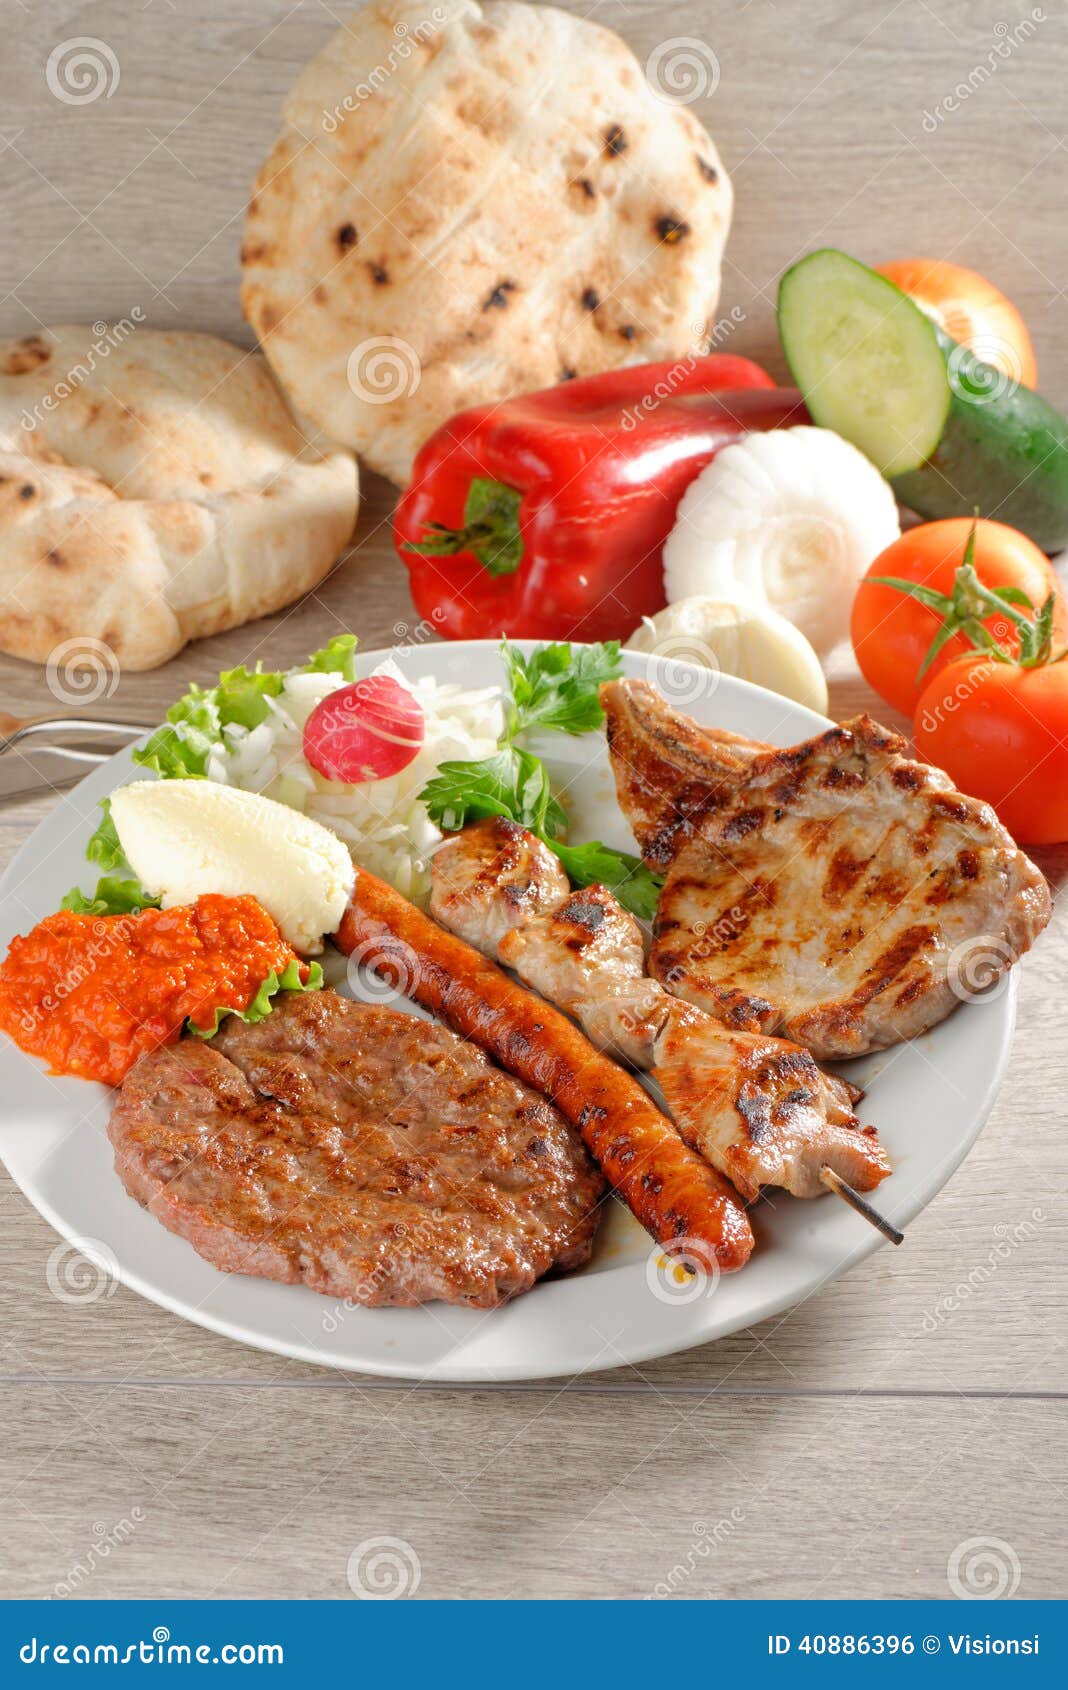 wholesome platter of mixed meats, balkan food